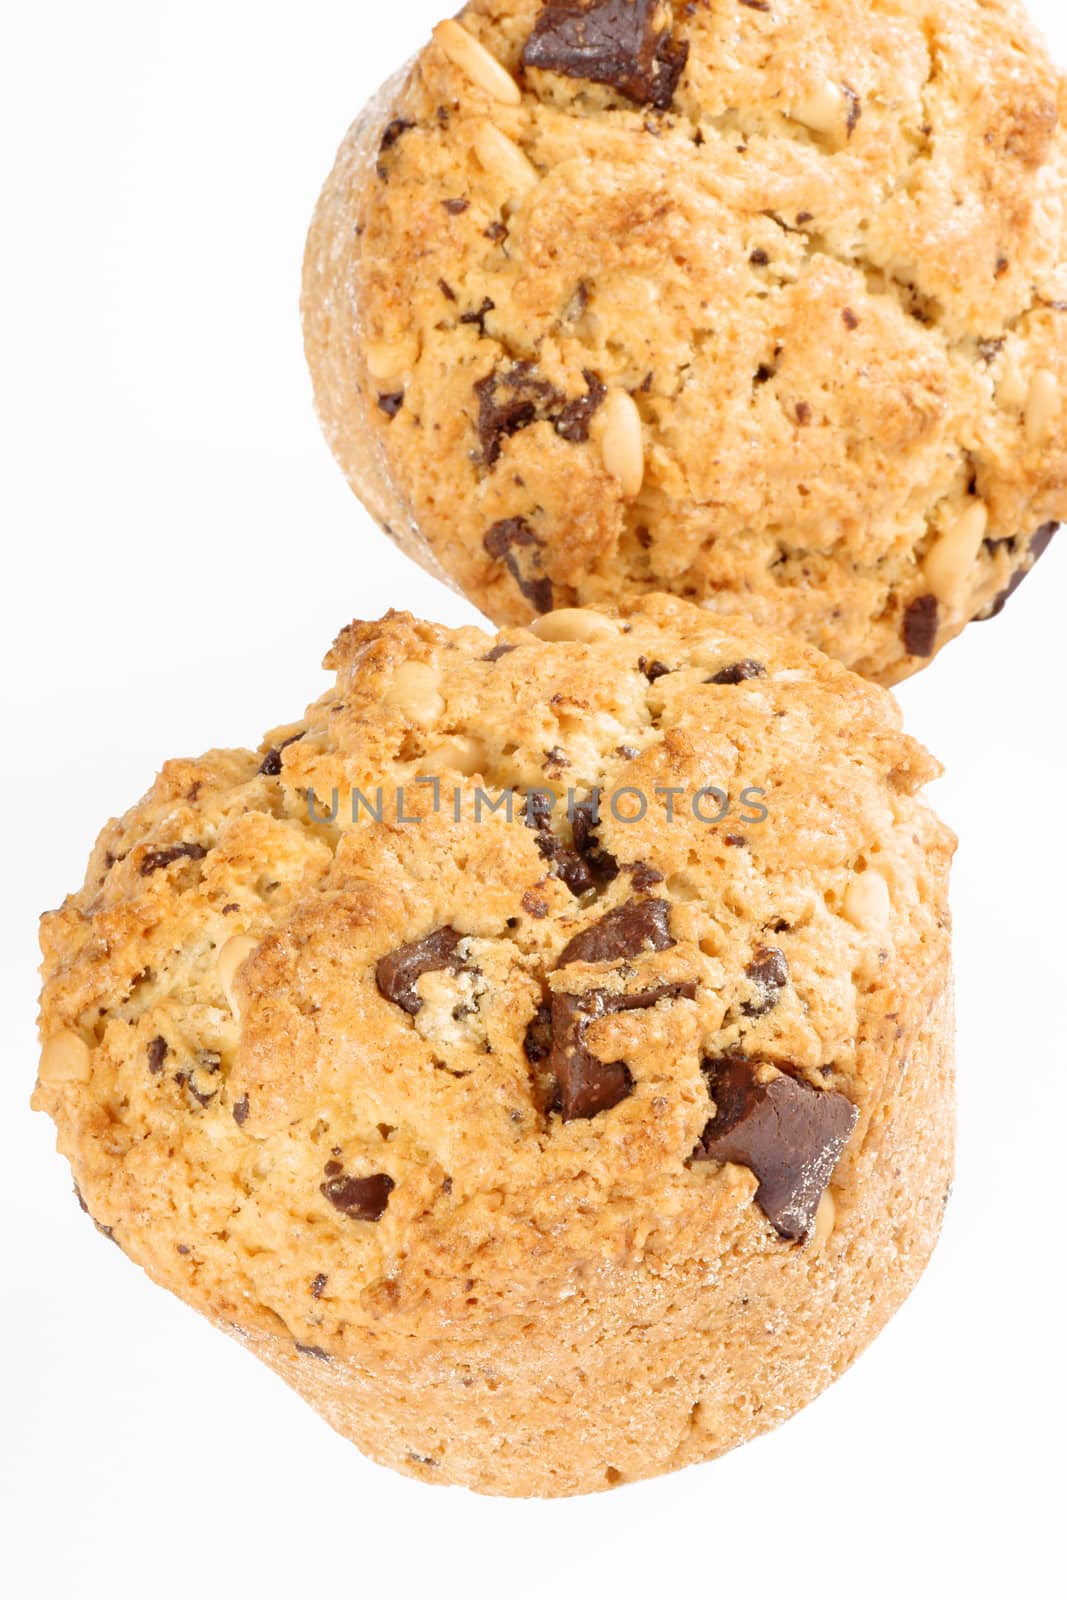 Freshly baked chocolate chip and pine nut muffin over a white background